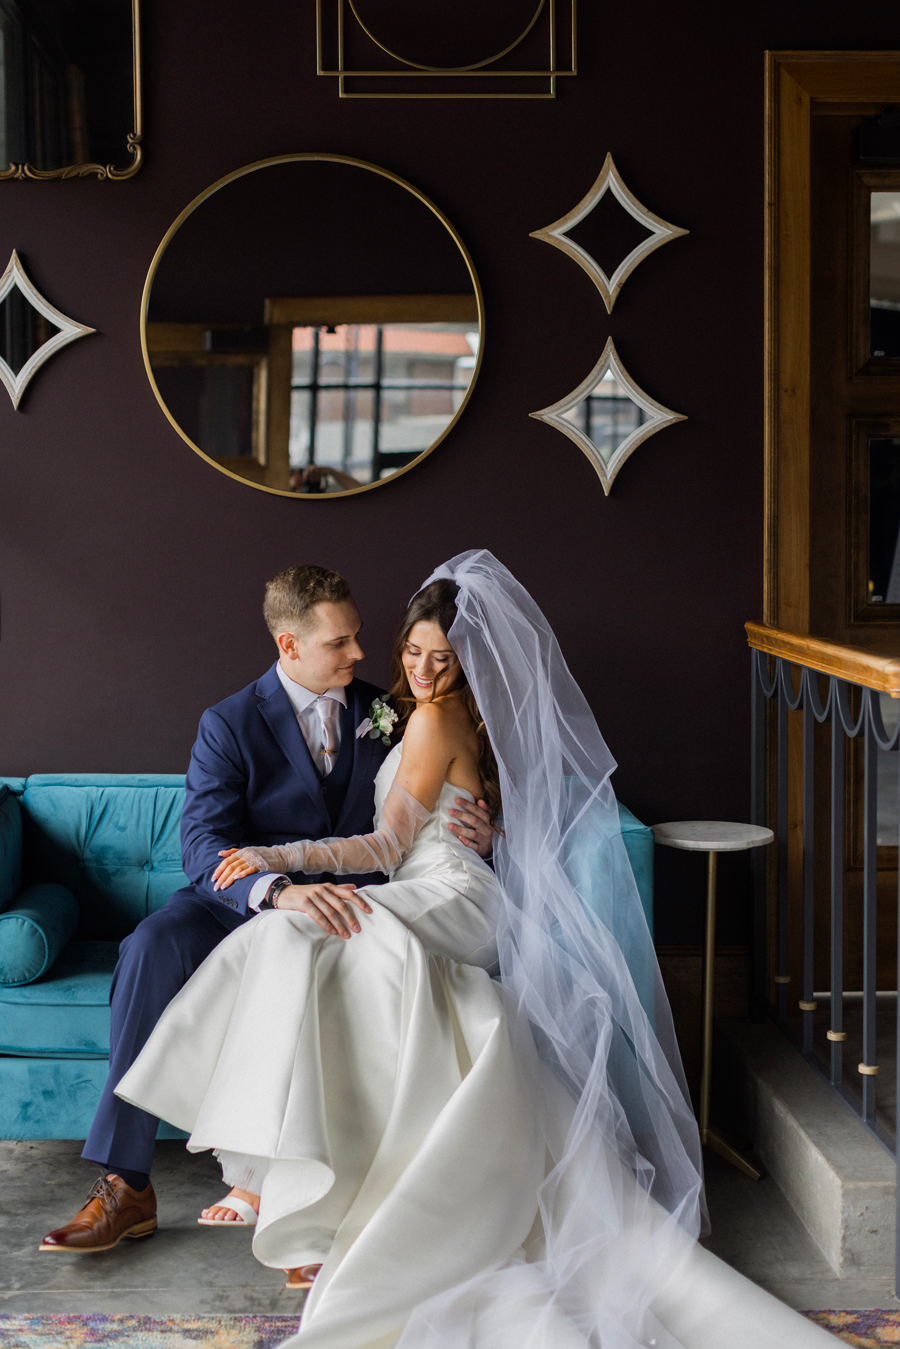 The bride and groom take portraits for their The Atrium on Tenth wedding in Columbia, Missouri by Love Tree Studios.